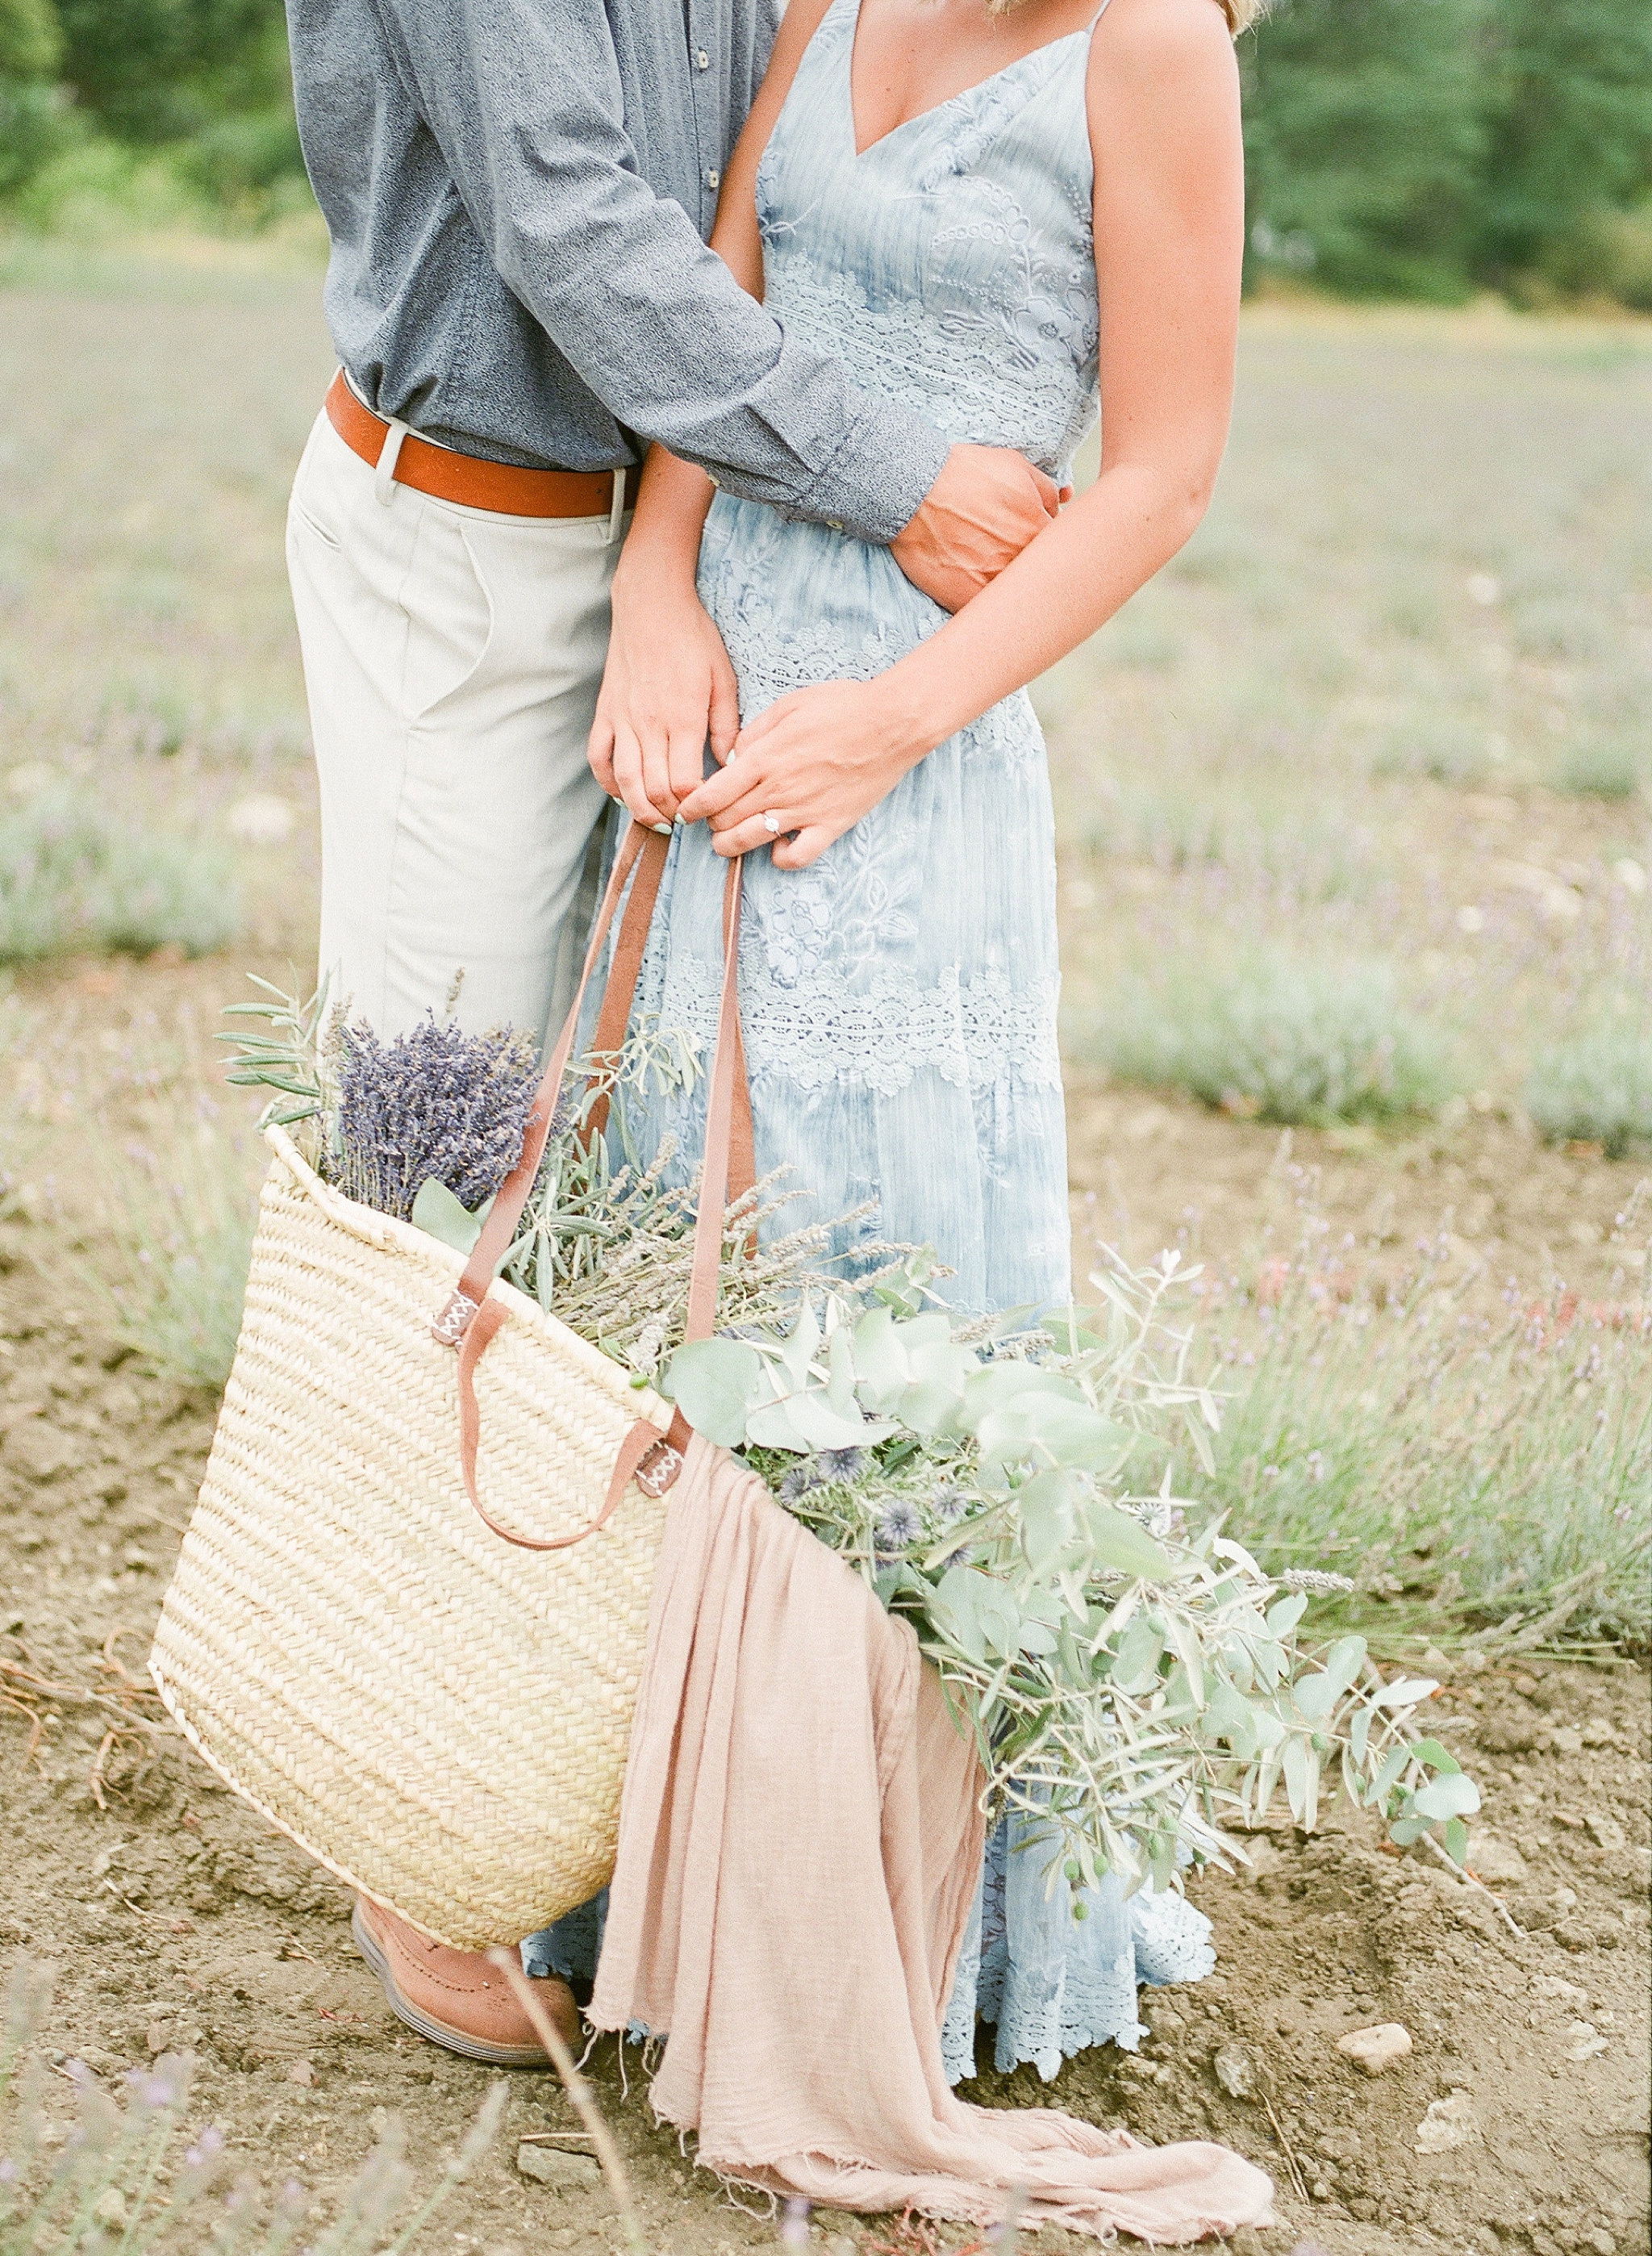 A romantic and stylish engagement session in the small town of Grignan. Photographed by Provence, France destination film wedding photographer, Alicia Lacey.